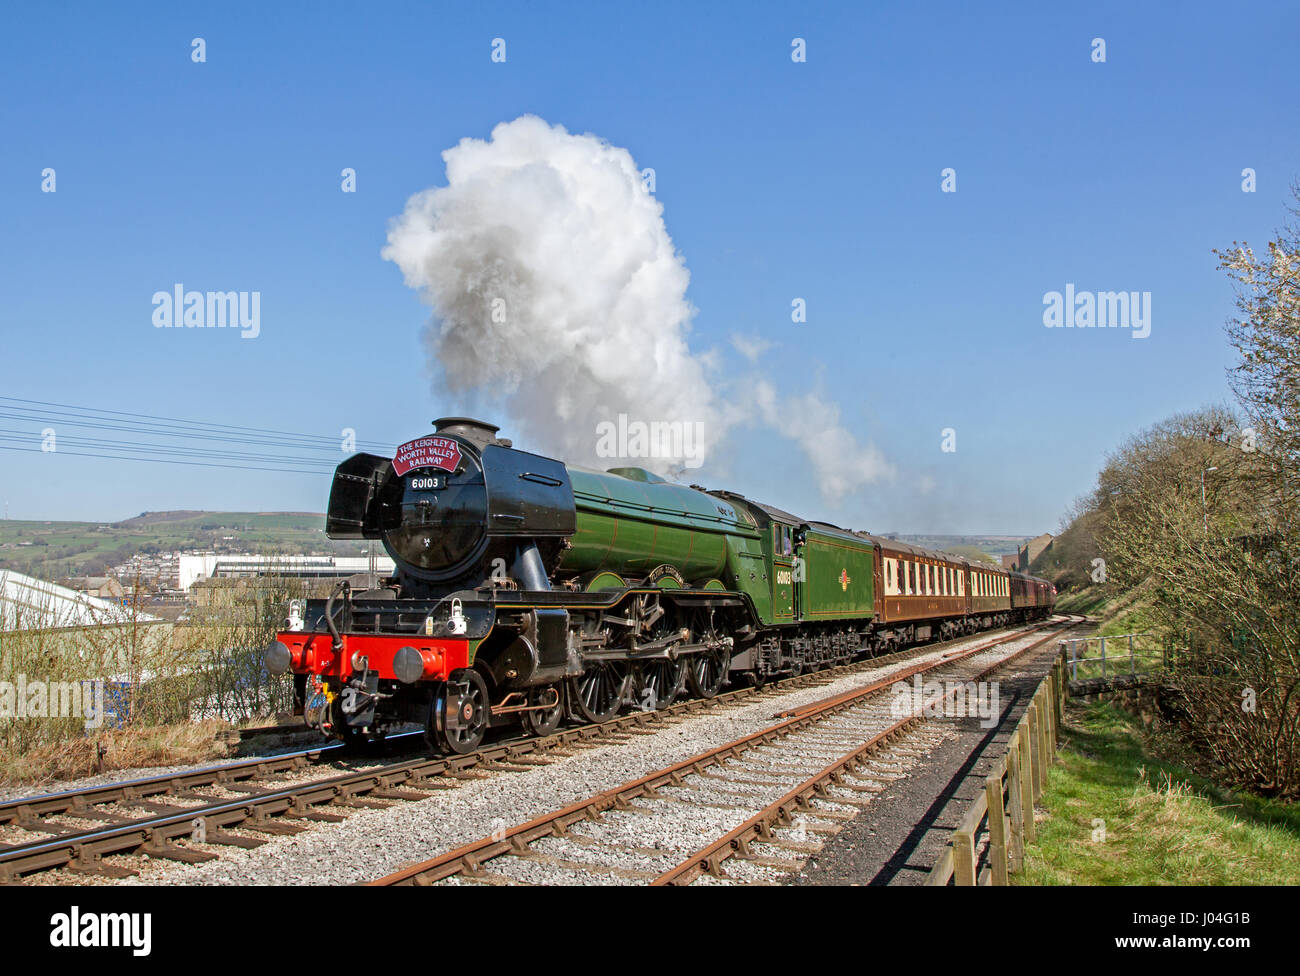 A3 60103 Flying Scotsman si diparte Keighley con WD 90733 banking a Keighley & Worth Valley Railway in data 8 aprile 2017. Foto Stock